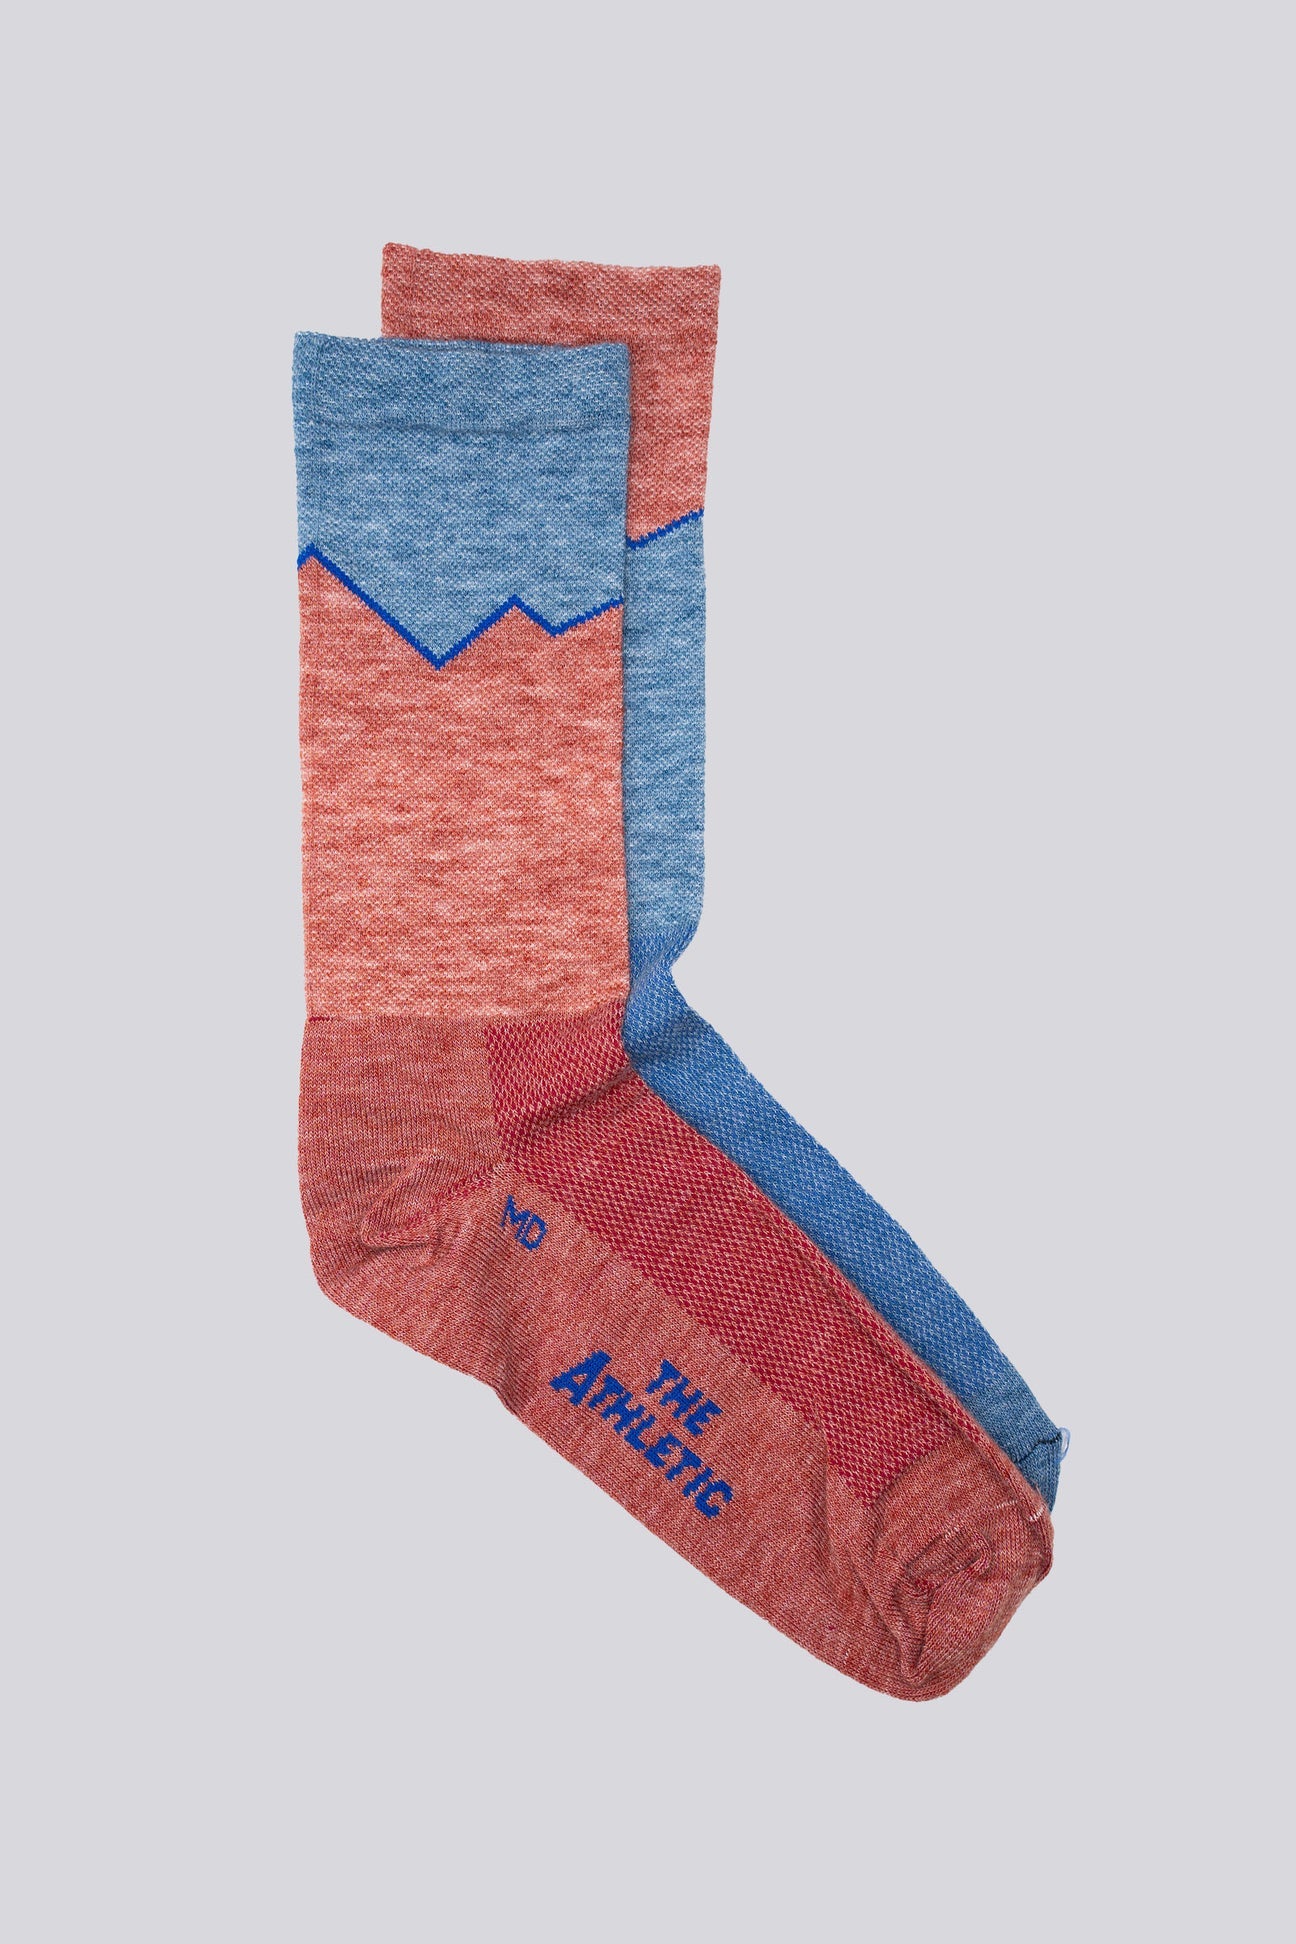 THE ATHLETIC COMMUNITY Elevation Blue And Pink Mismatched Cycling Socks